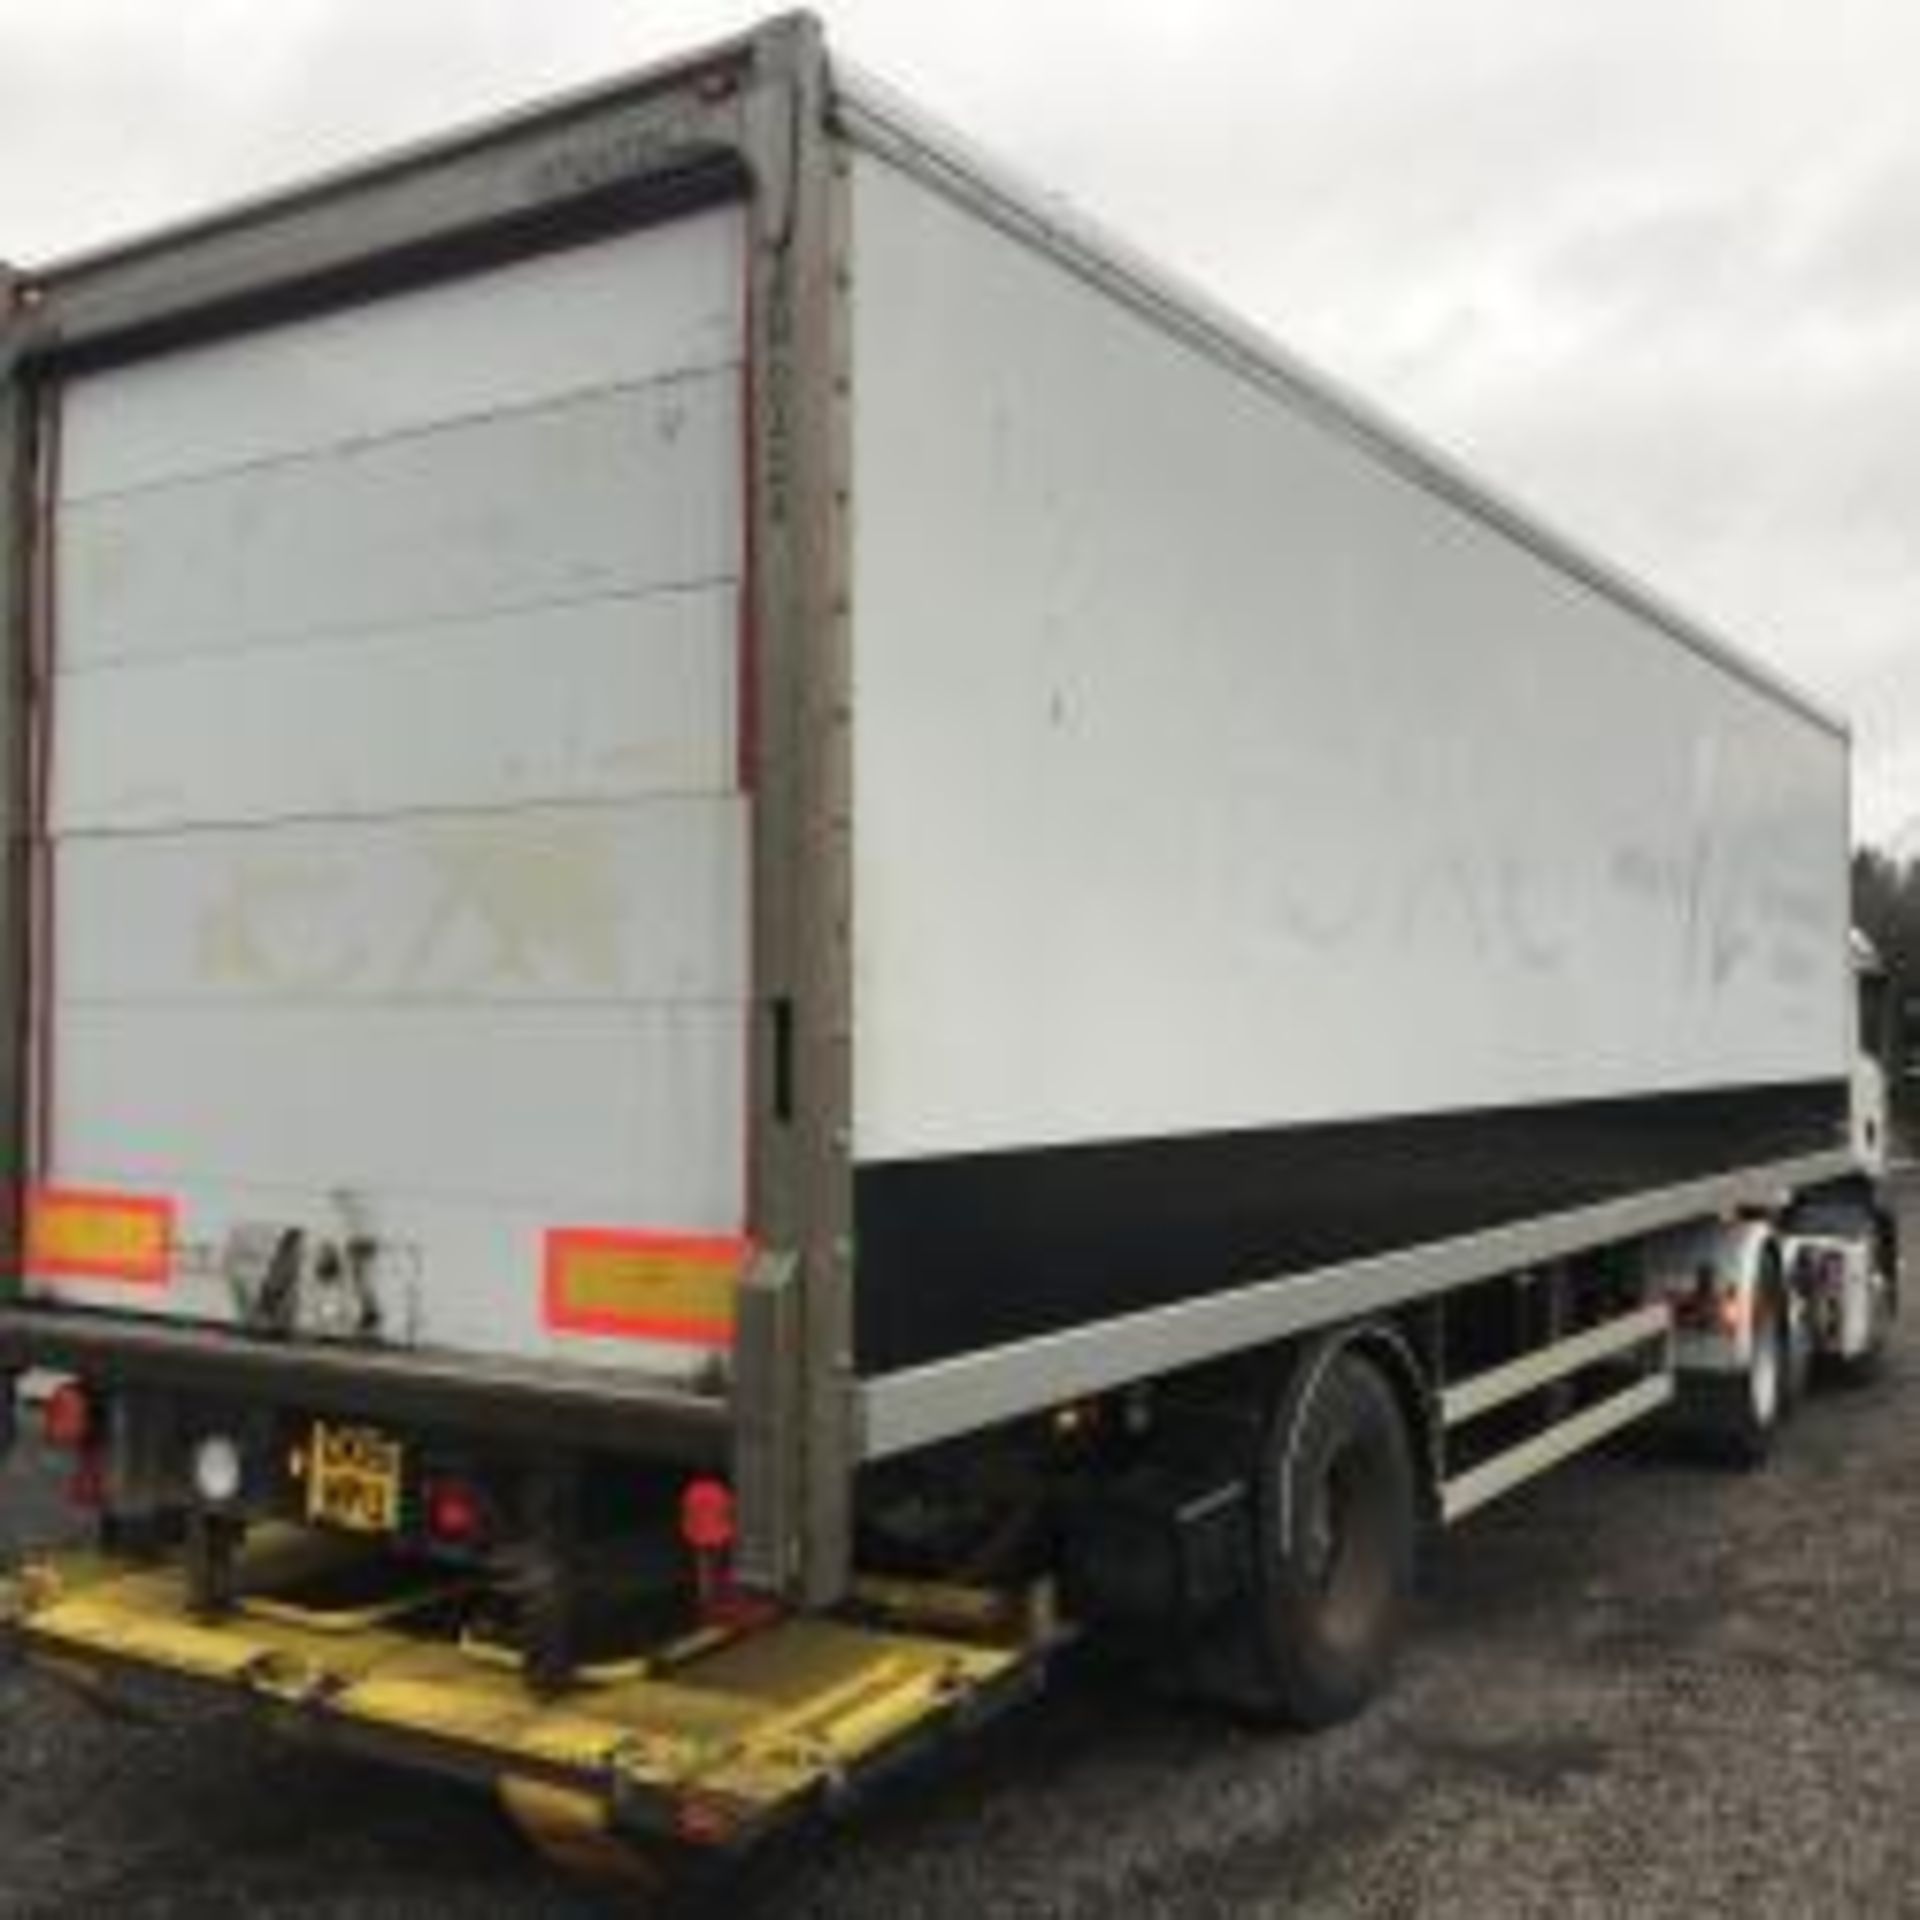 2007 DONBUR SINGLE AXLE TRAILER WITH TAIL LIFT, GOOD CONDITION *PLUS VAT* - Image 4 of 11